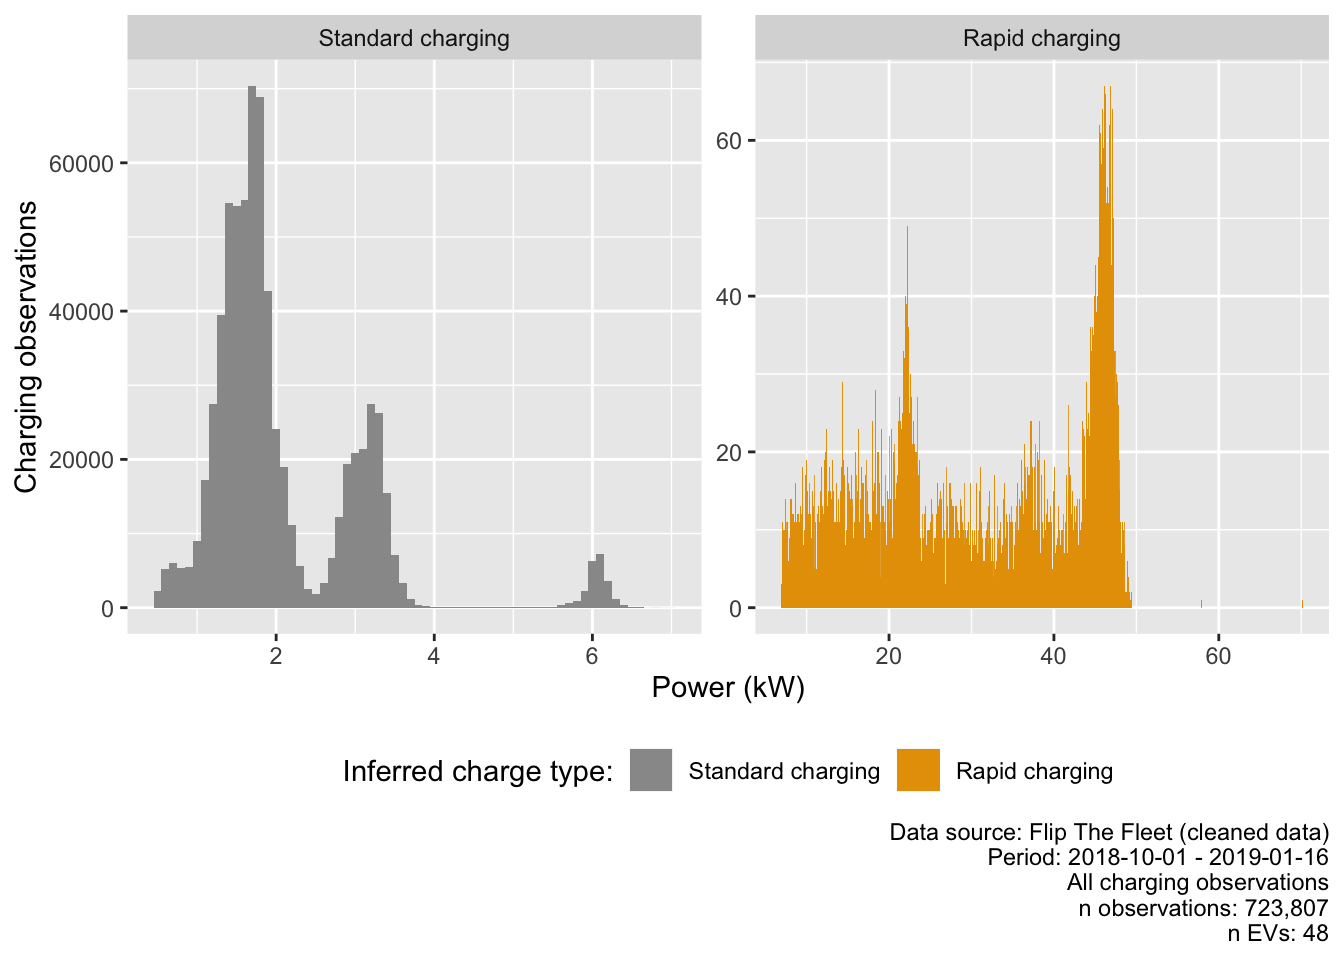 Observed power demand distribution by charge type where charging observed